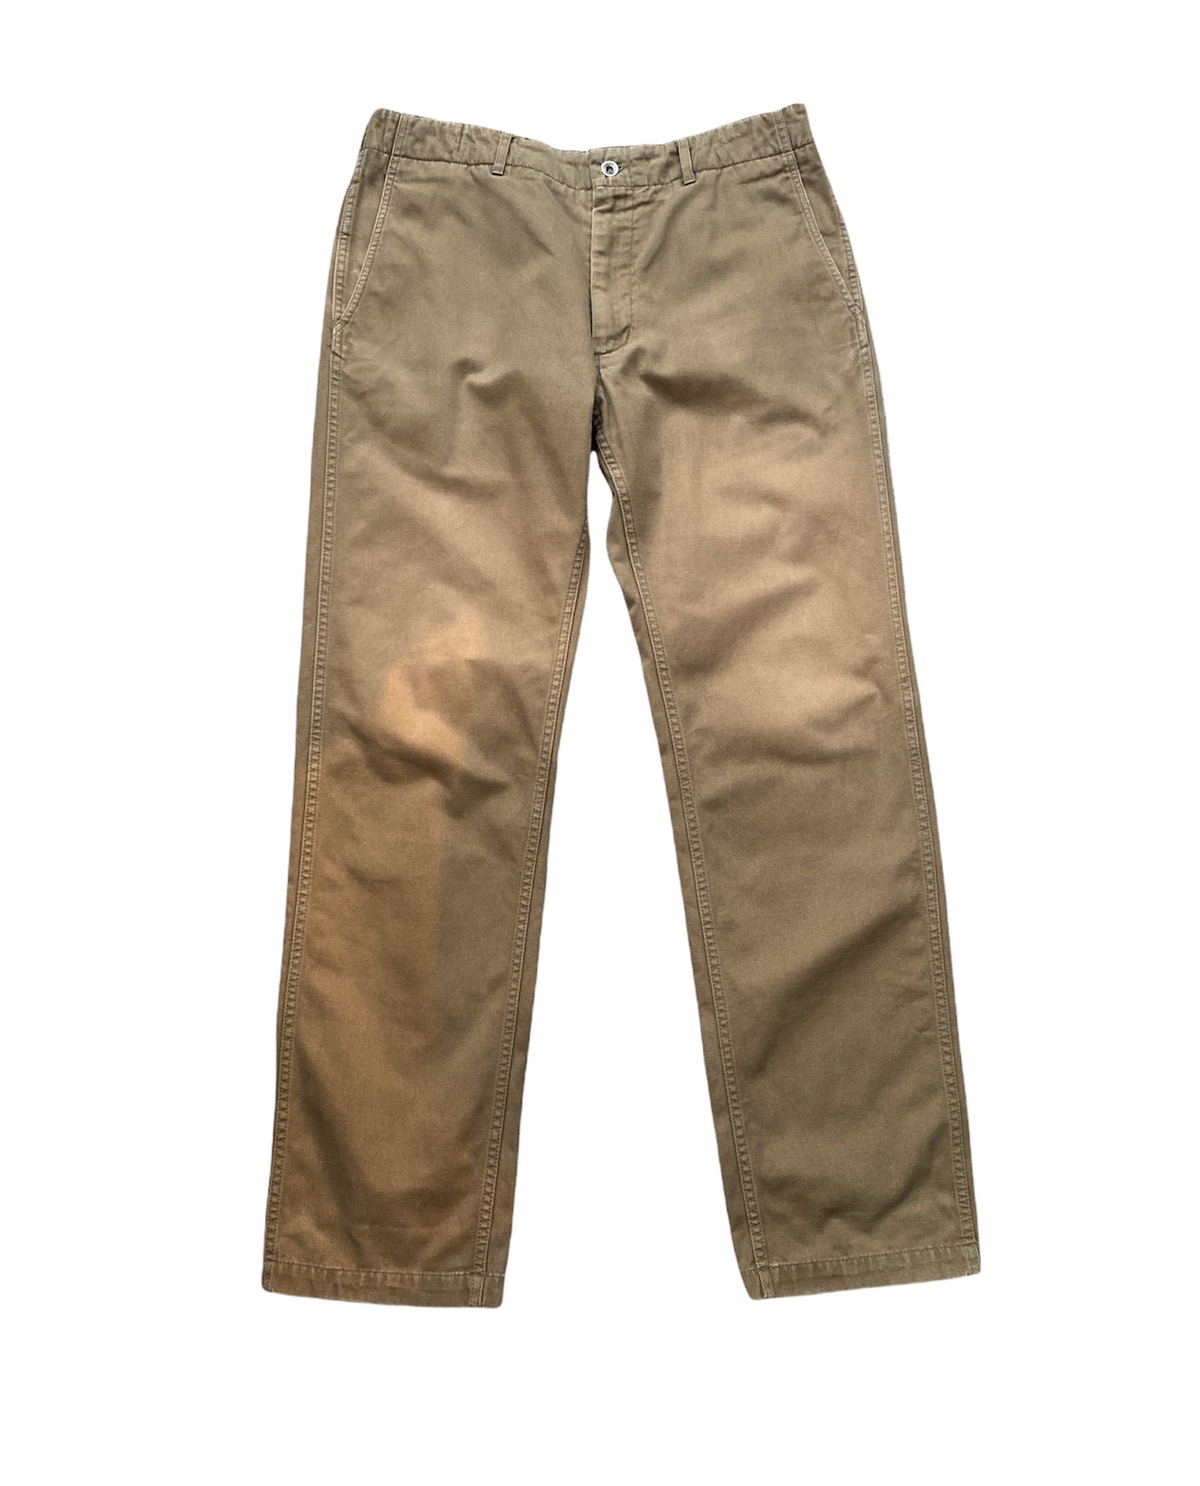 Vintage Engineered Garment Nepenthes Cargo Pants - 1